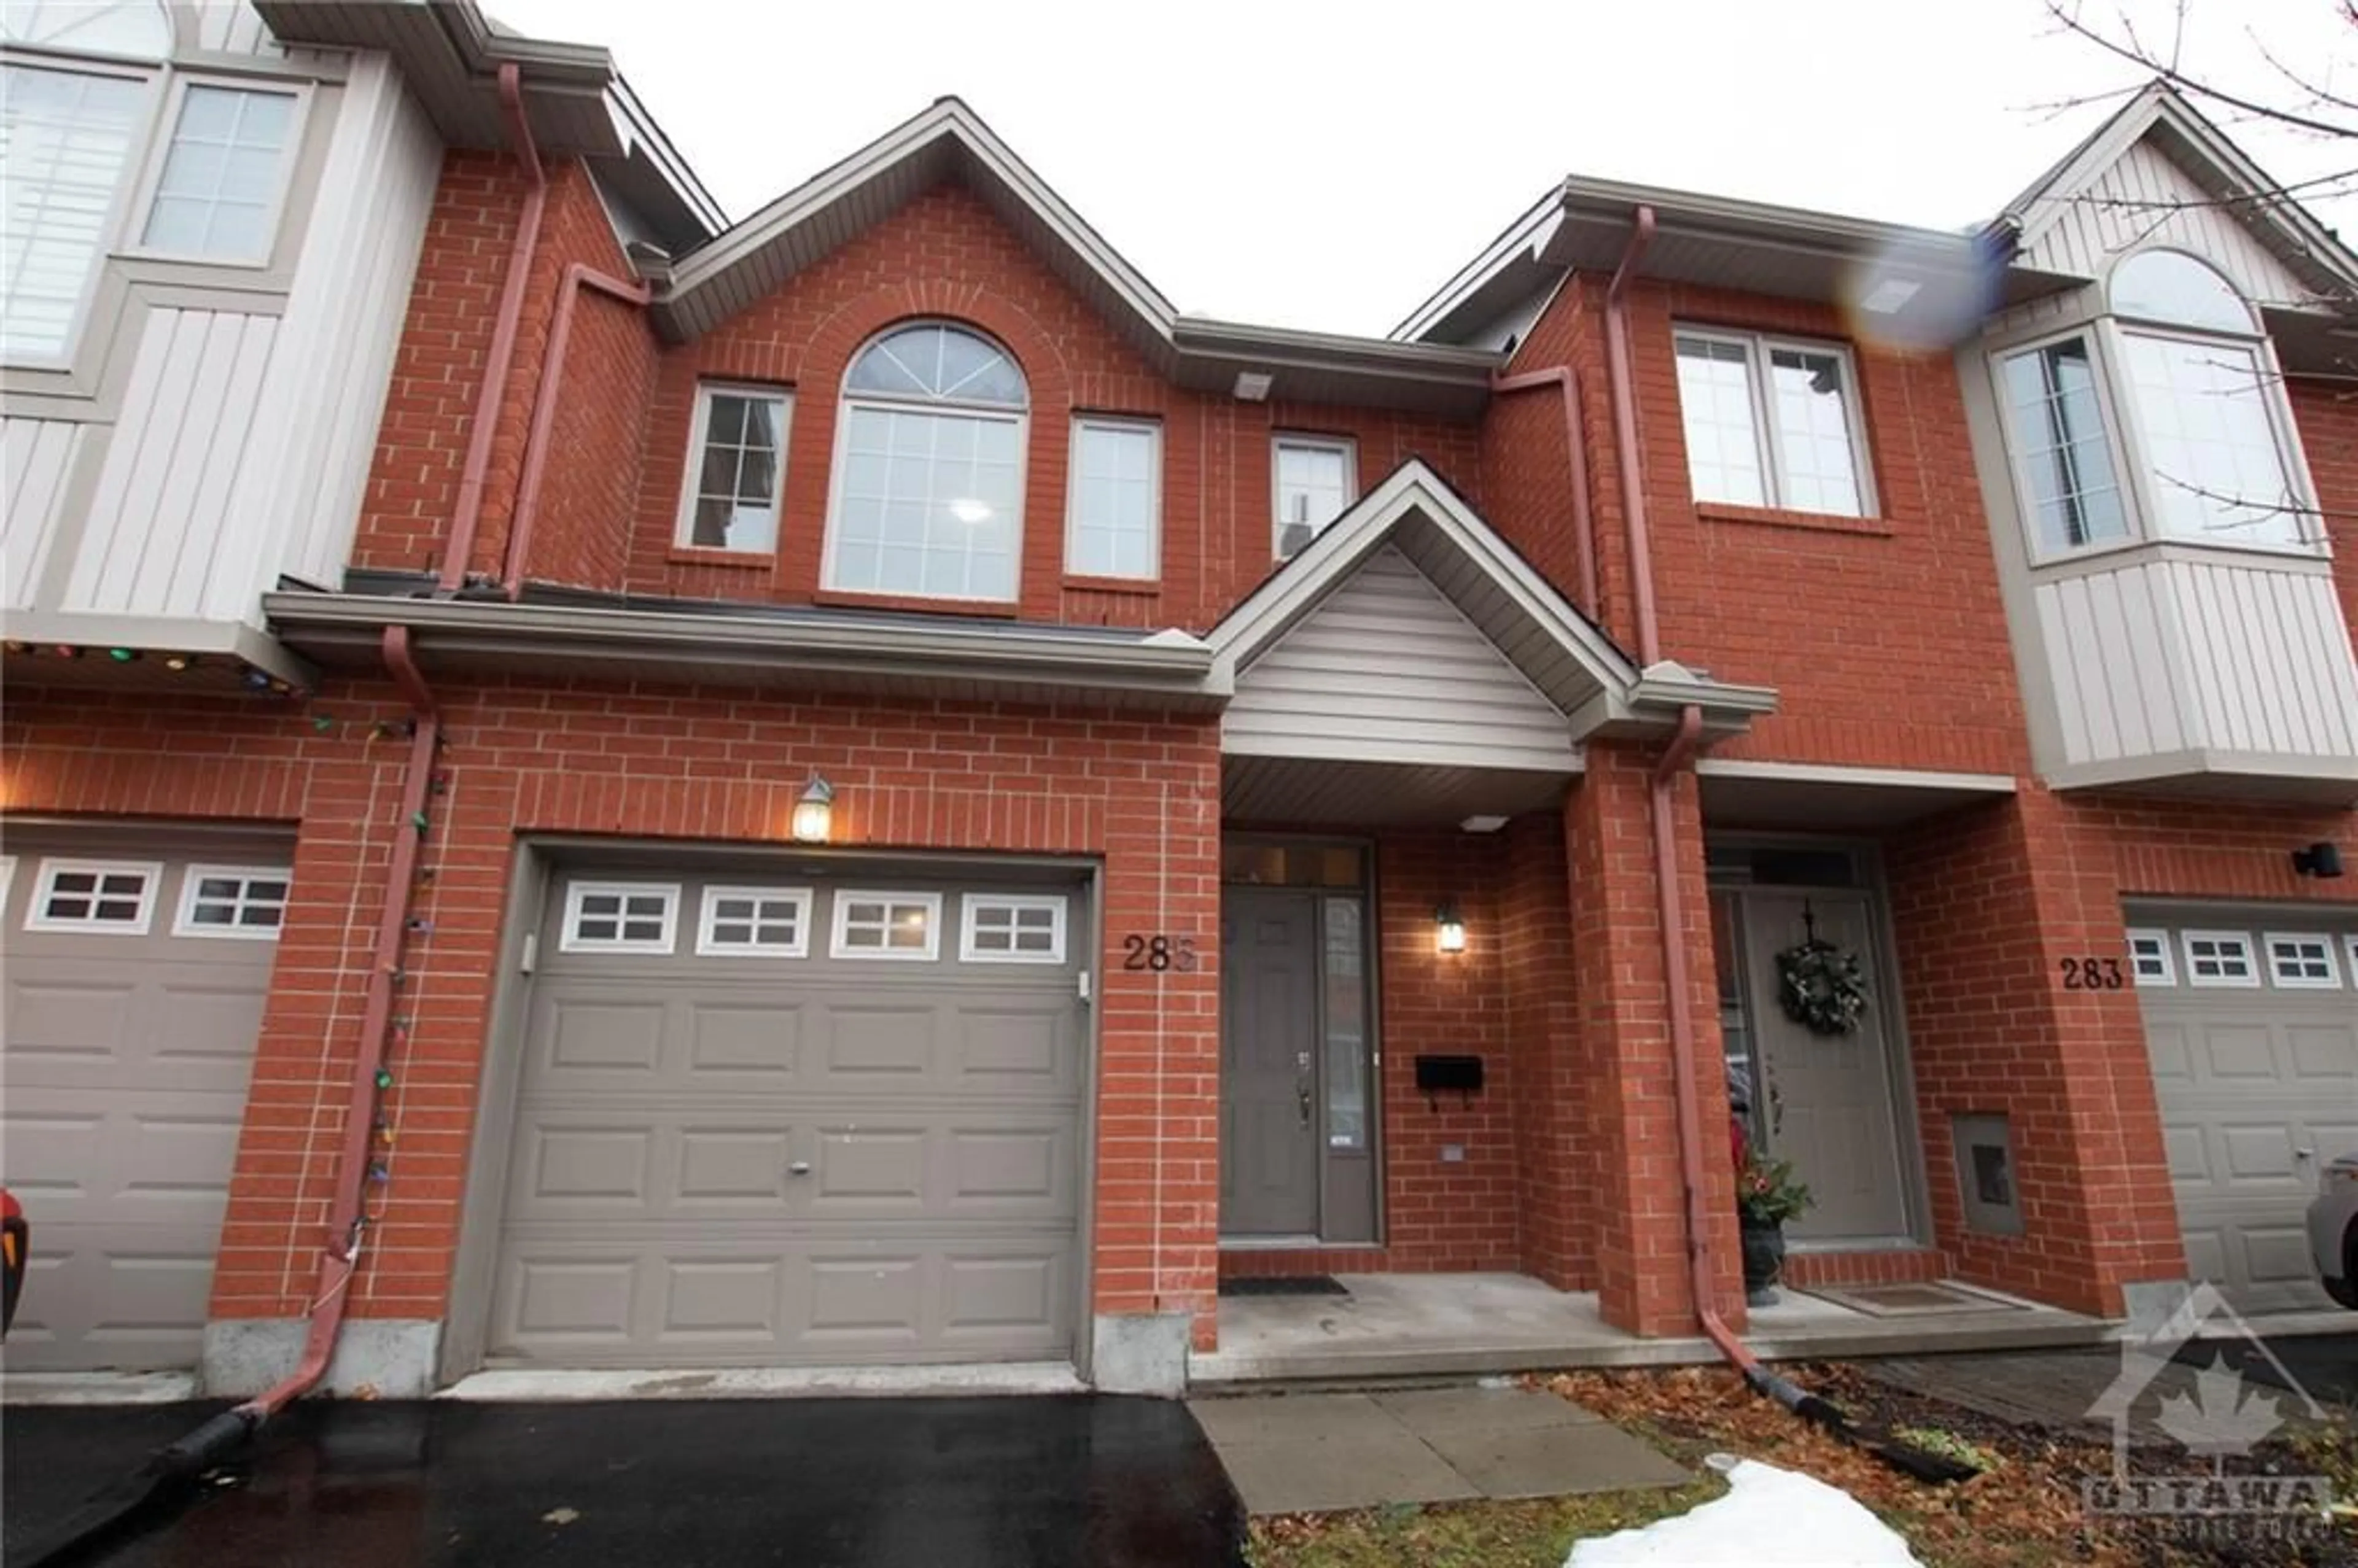 Home with brick exterior material for 285 MEILLEUR Pvt, Ottawa Ontario K1L 0A8